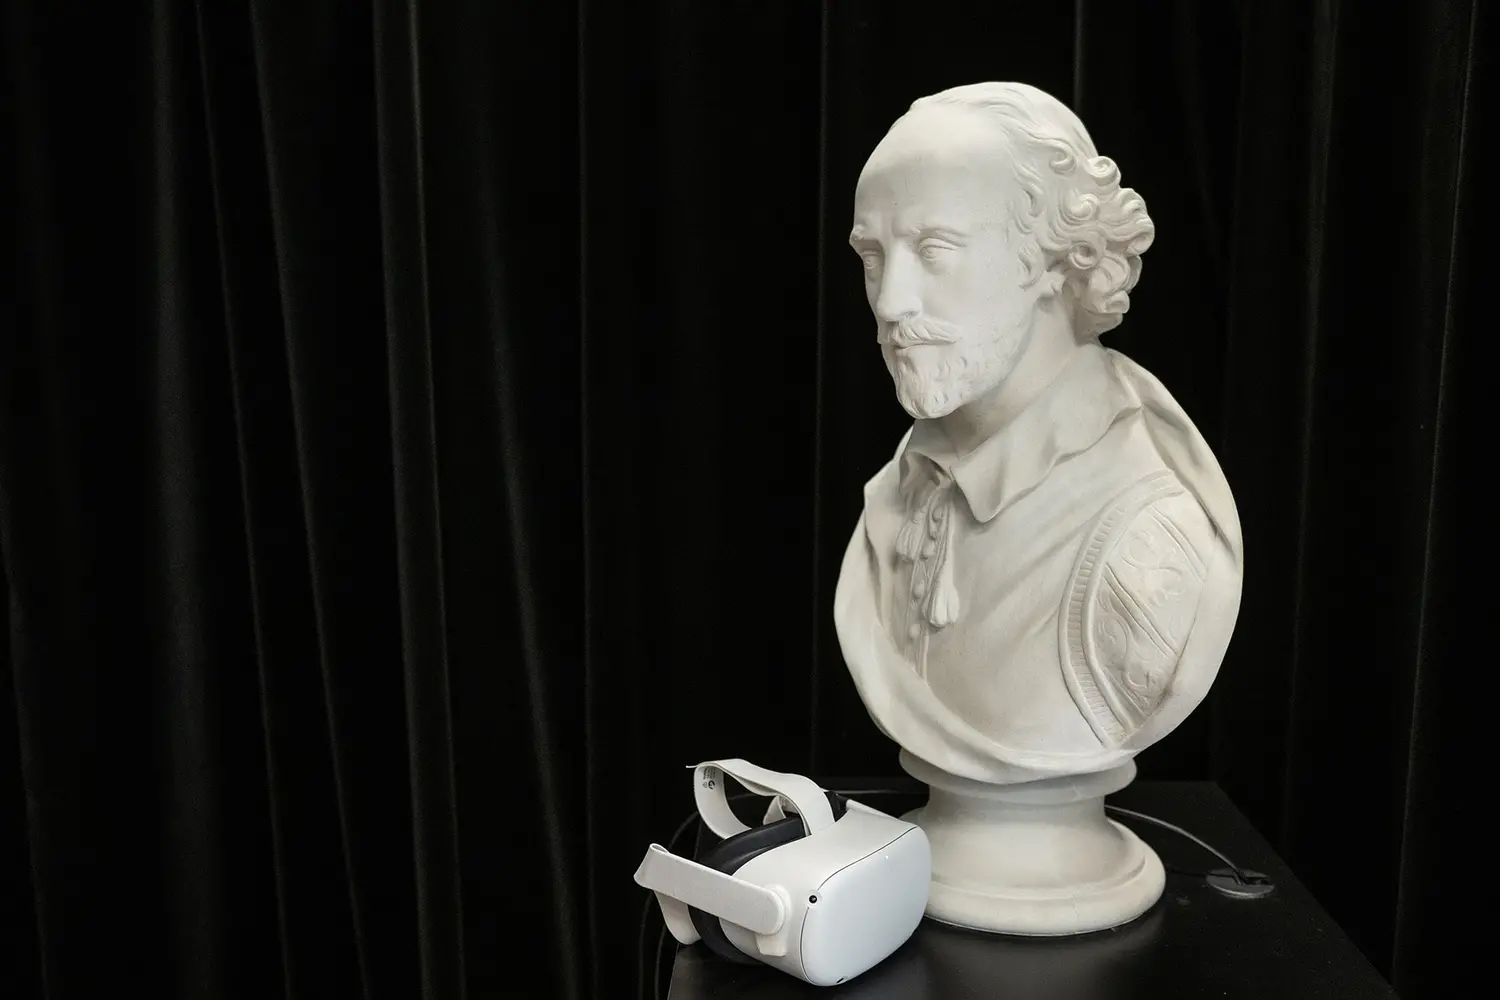 A Shakespeare bust with a VR headset.